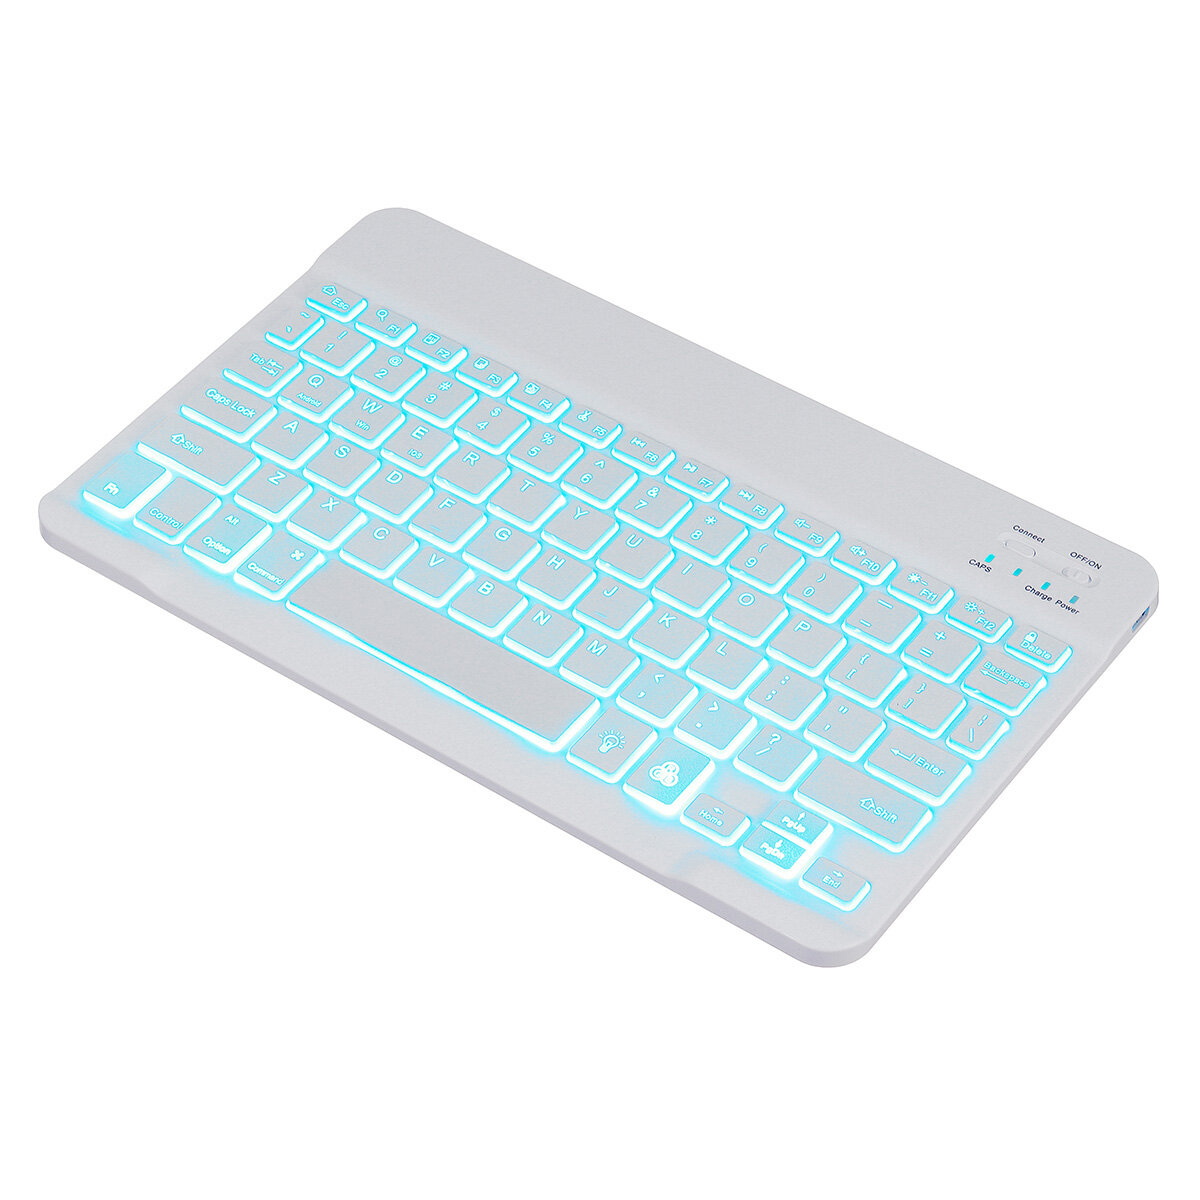 RGB Backlight Wireless bluetooth Keyboard for Android, IOS and Windows Tablet COD